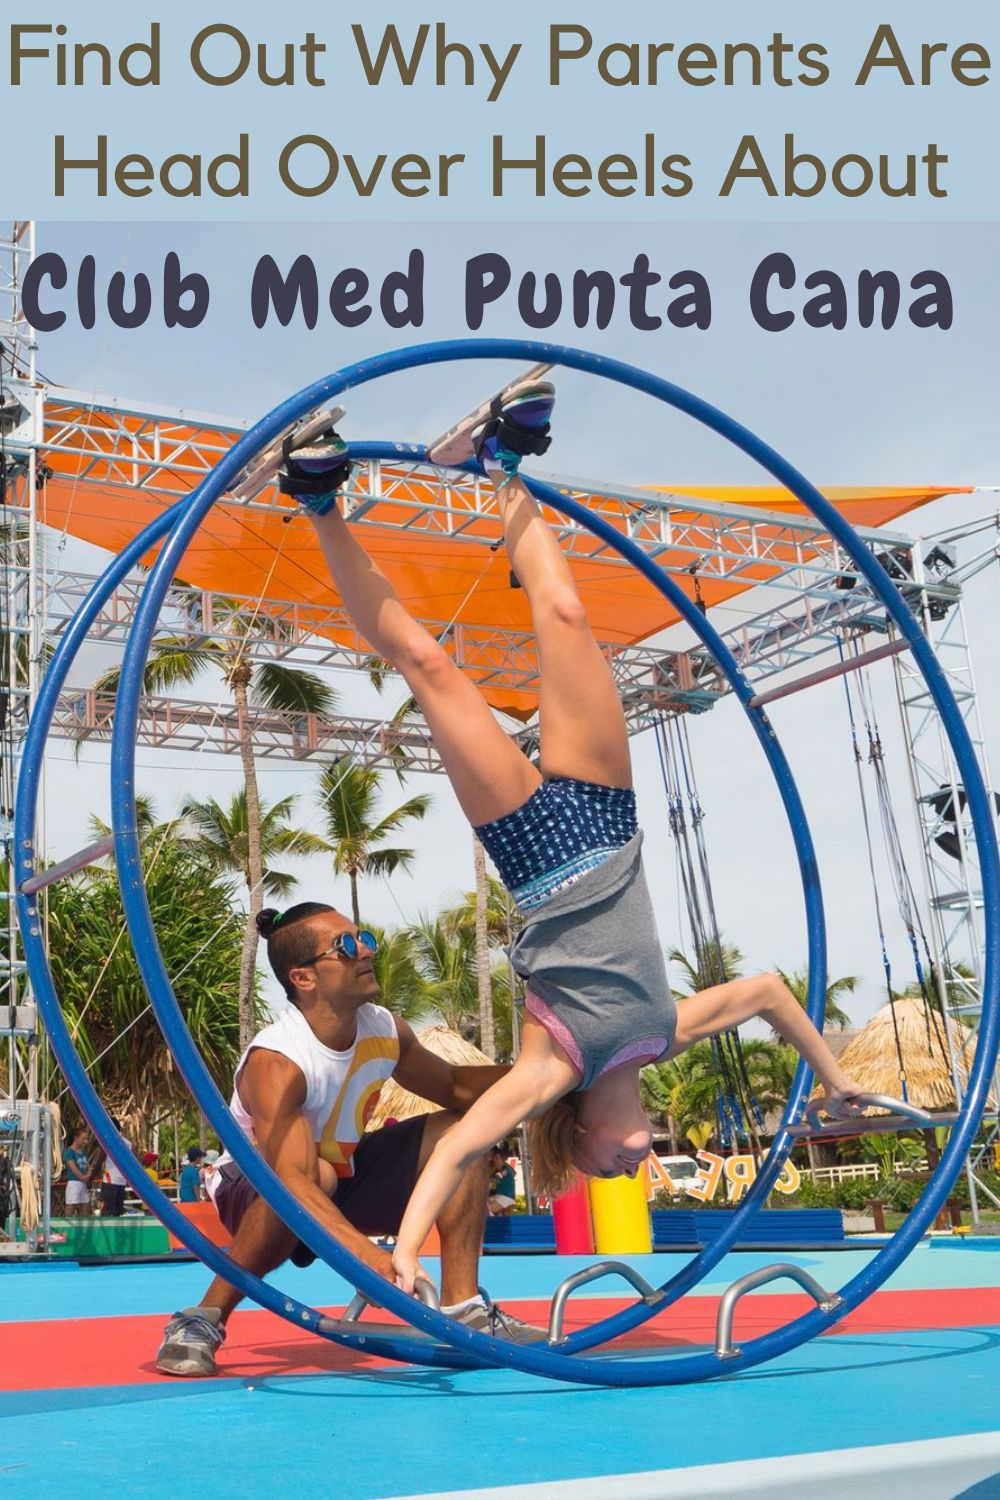 club med punta cana review: club med is often pricier than other caribbean all-inclusives. but the wealth of family amenities and activities at its punta cana resort makes it a good value for a vacation with kids.